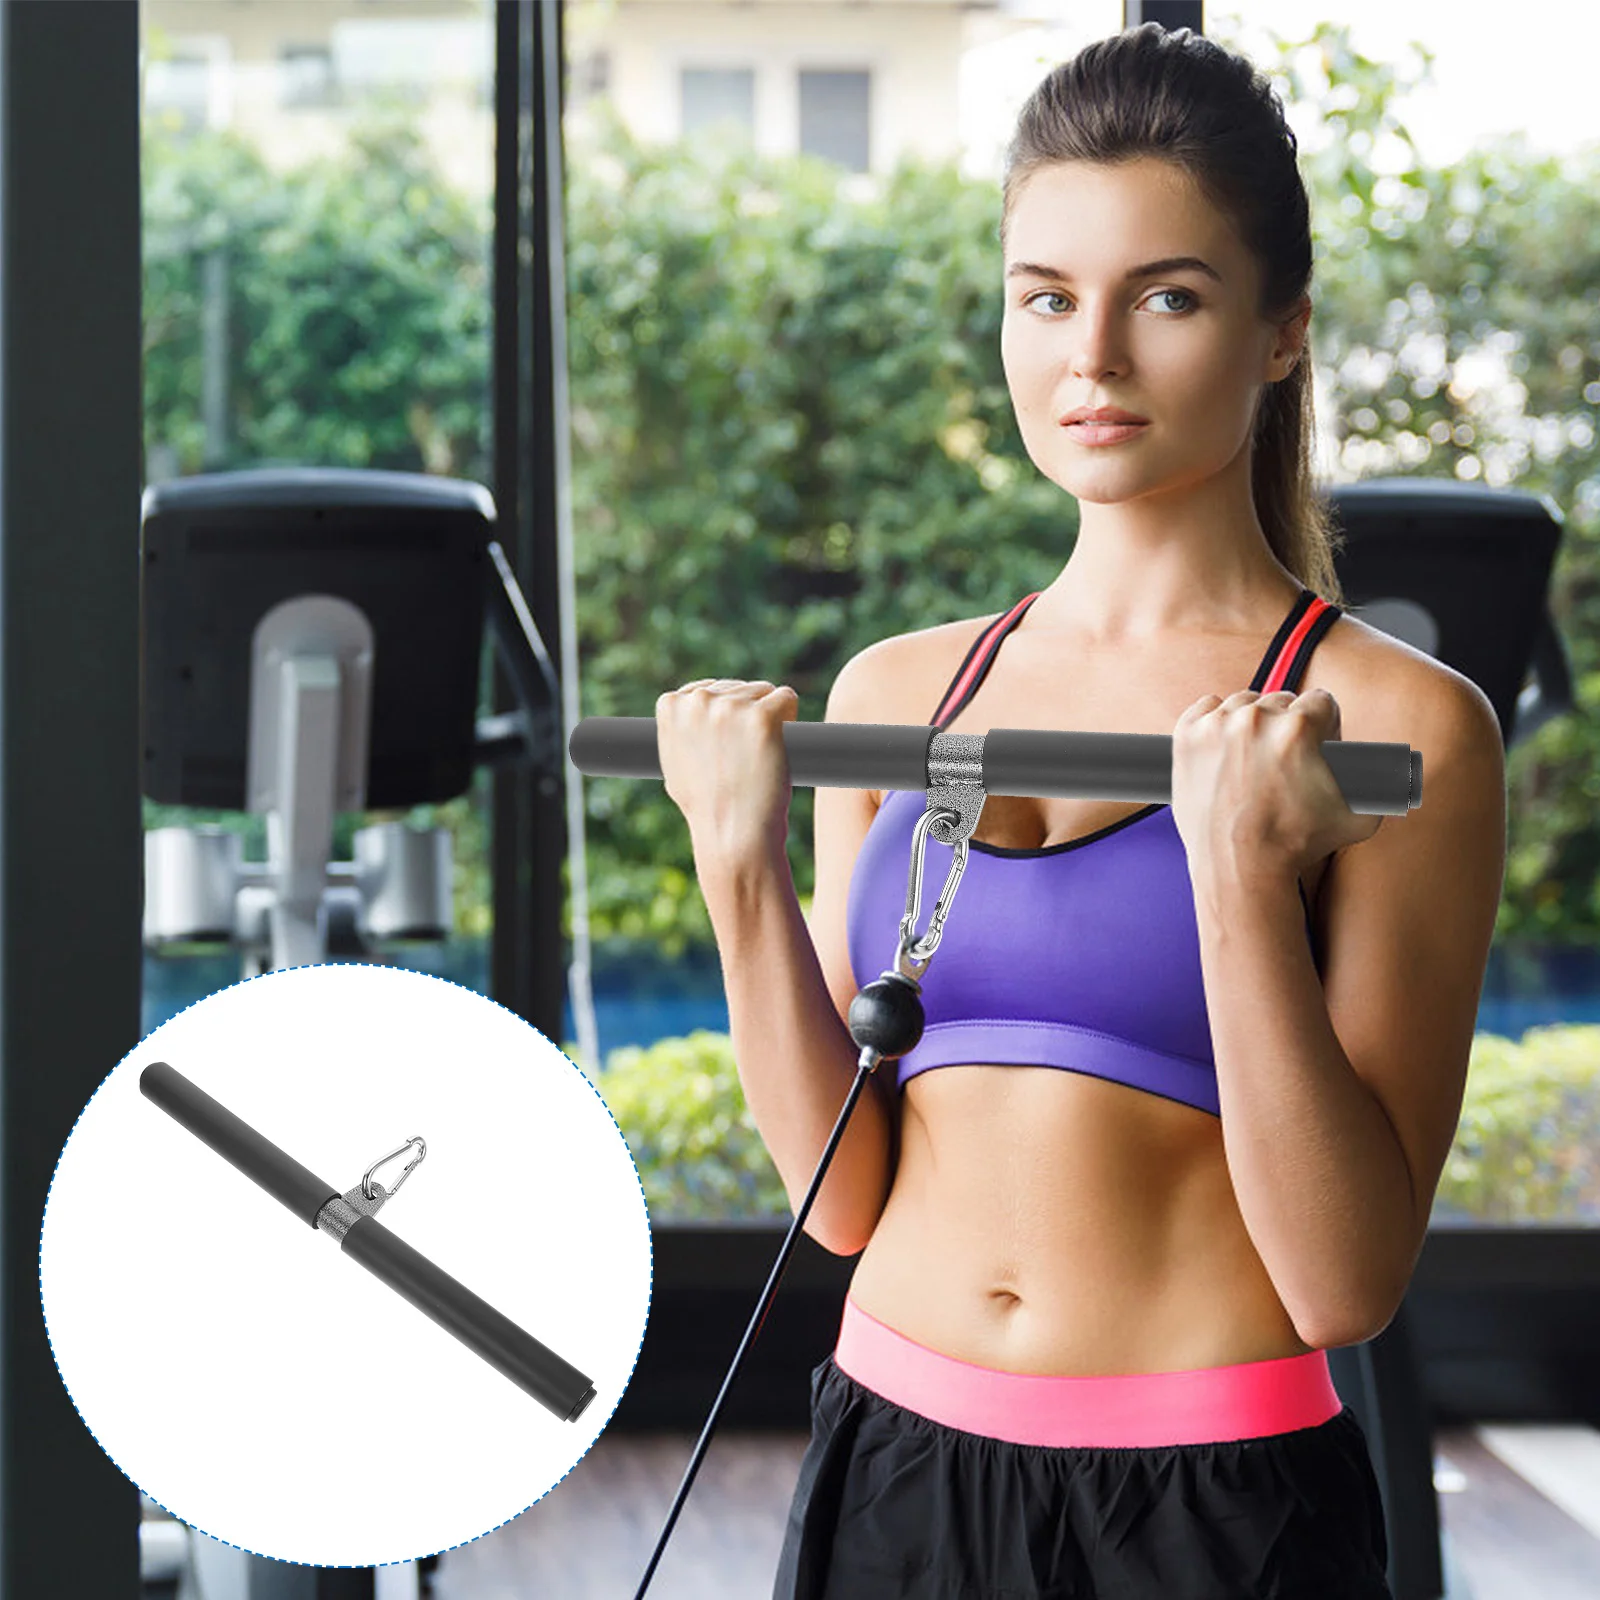 

DIY Rotating Straight Bar Attachment for Rowing Exercises Fitness Gym Arm Shoulder Muscles, Row Bar LAT Pulldown Bar Biceps